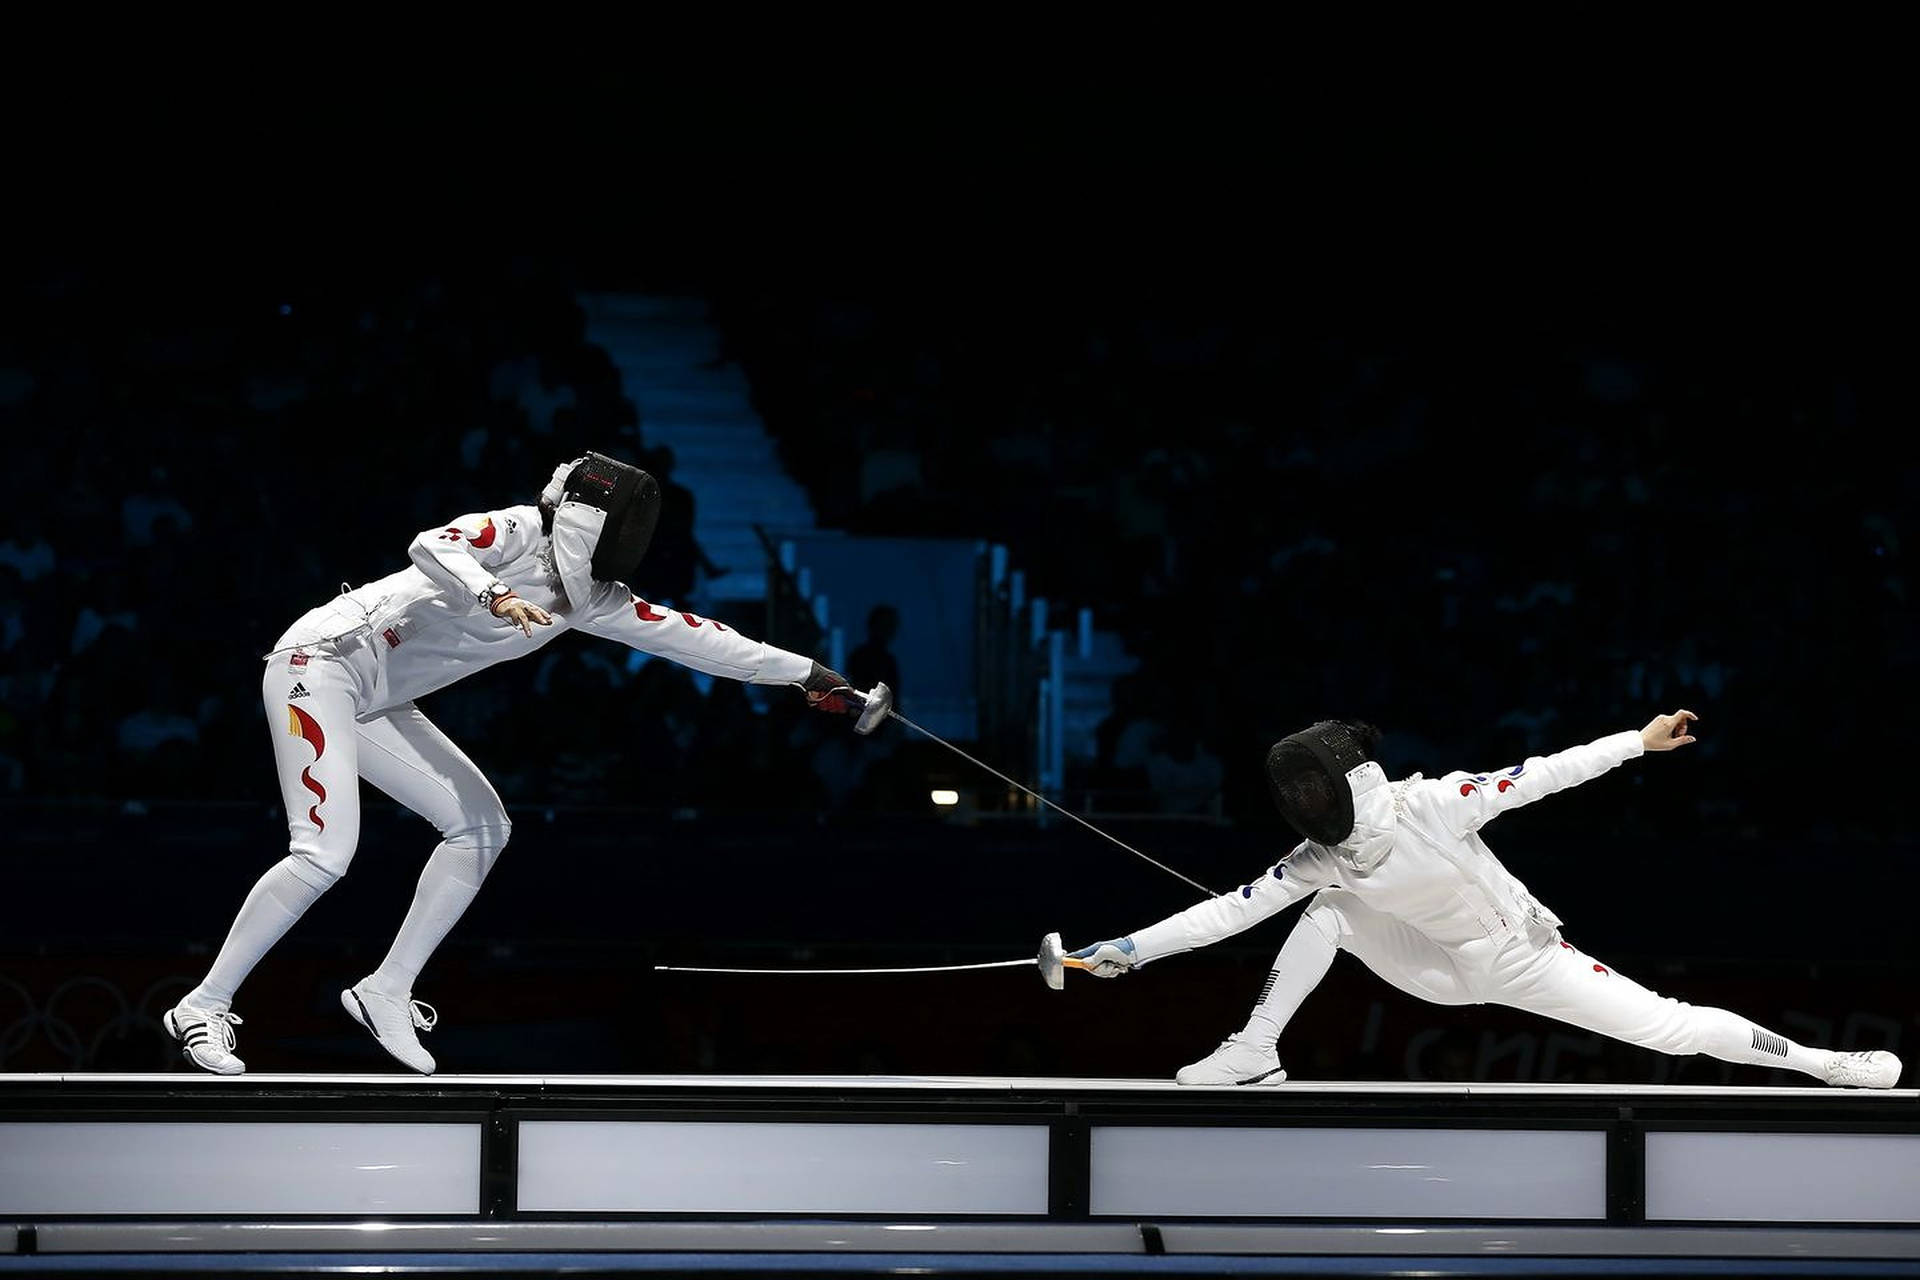 fencing epee wallpaper